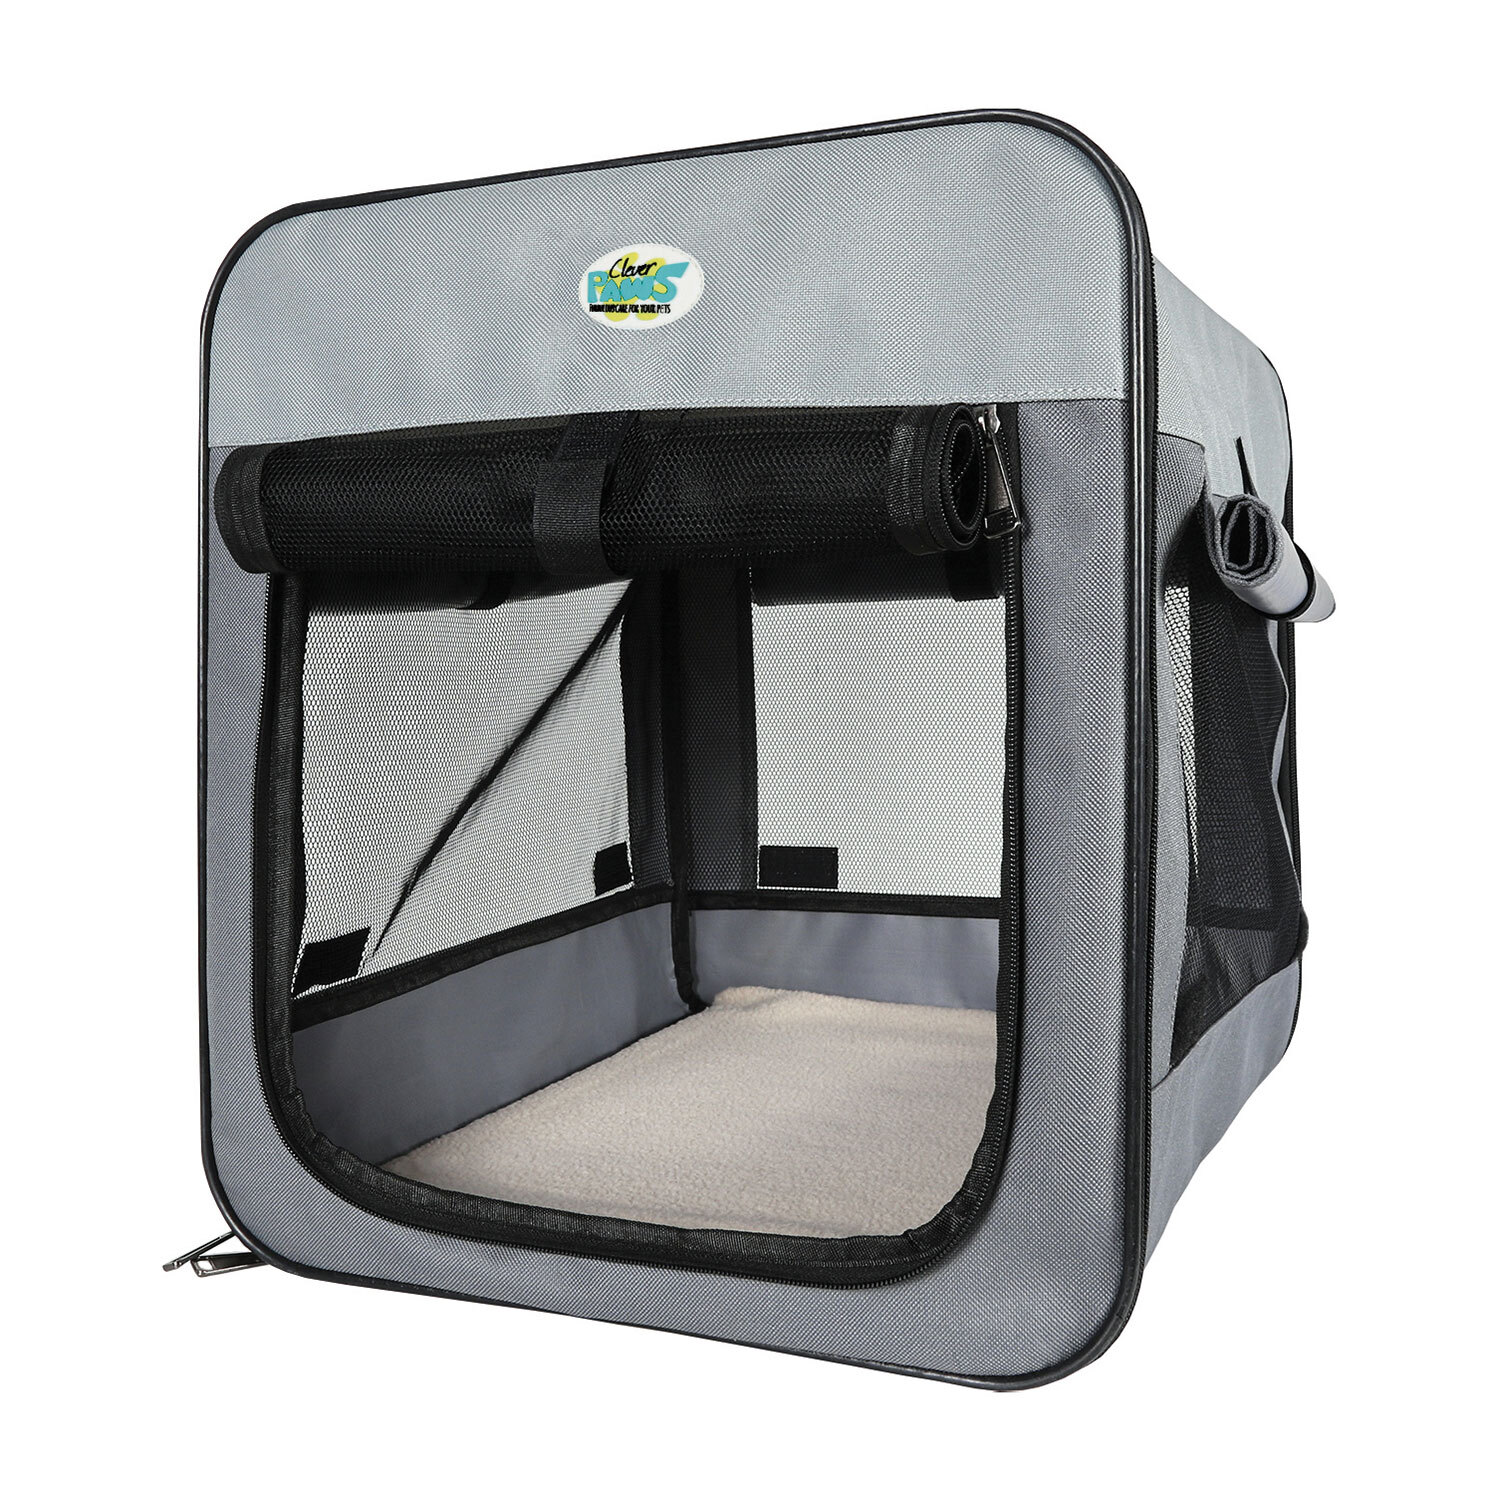 Clever Paws Jumbo Soft Pet Kennel Image 2